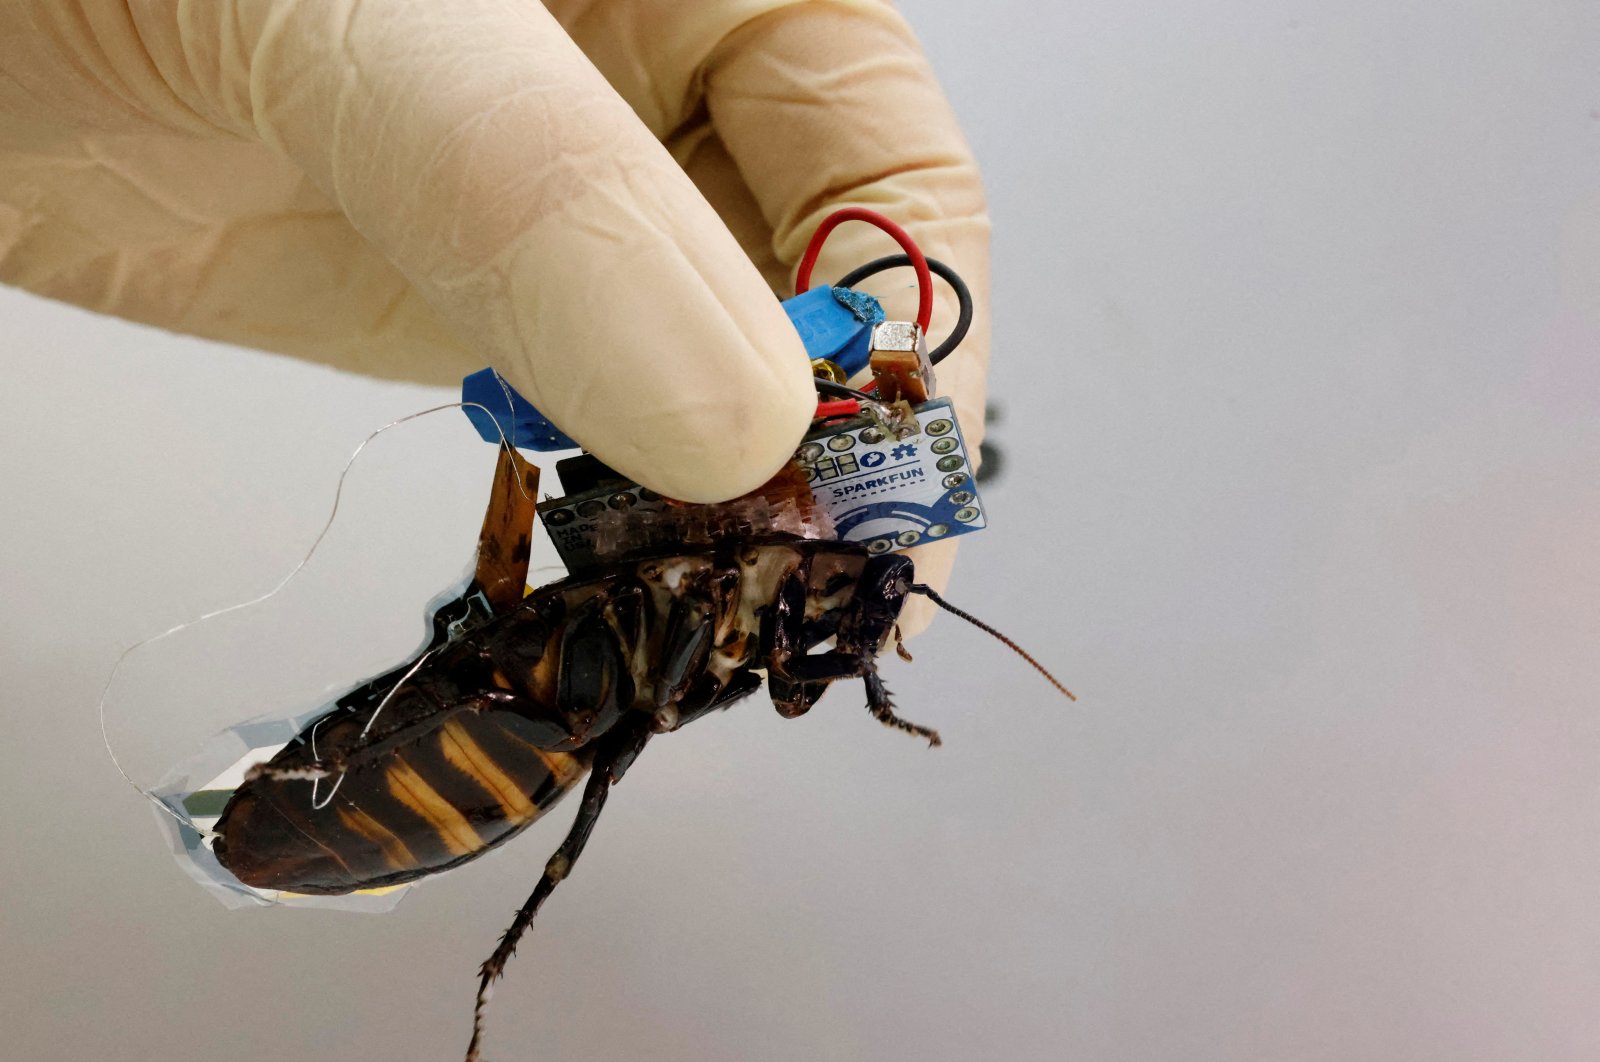 A researcher shows a Madagascar hissing cockroach, mounted with a &quot;backpack&quot; of electronics, in Wako, Saitama Prefecture, Japan, Sept. 16, 2022. (Reuters Photo)